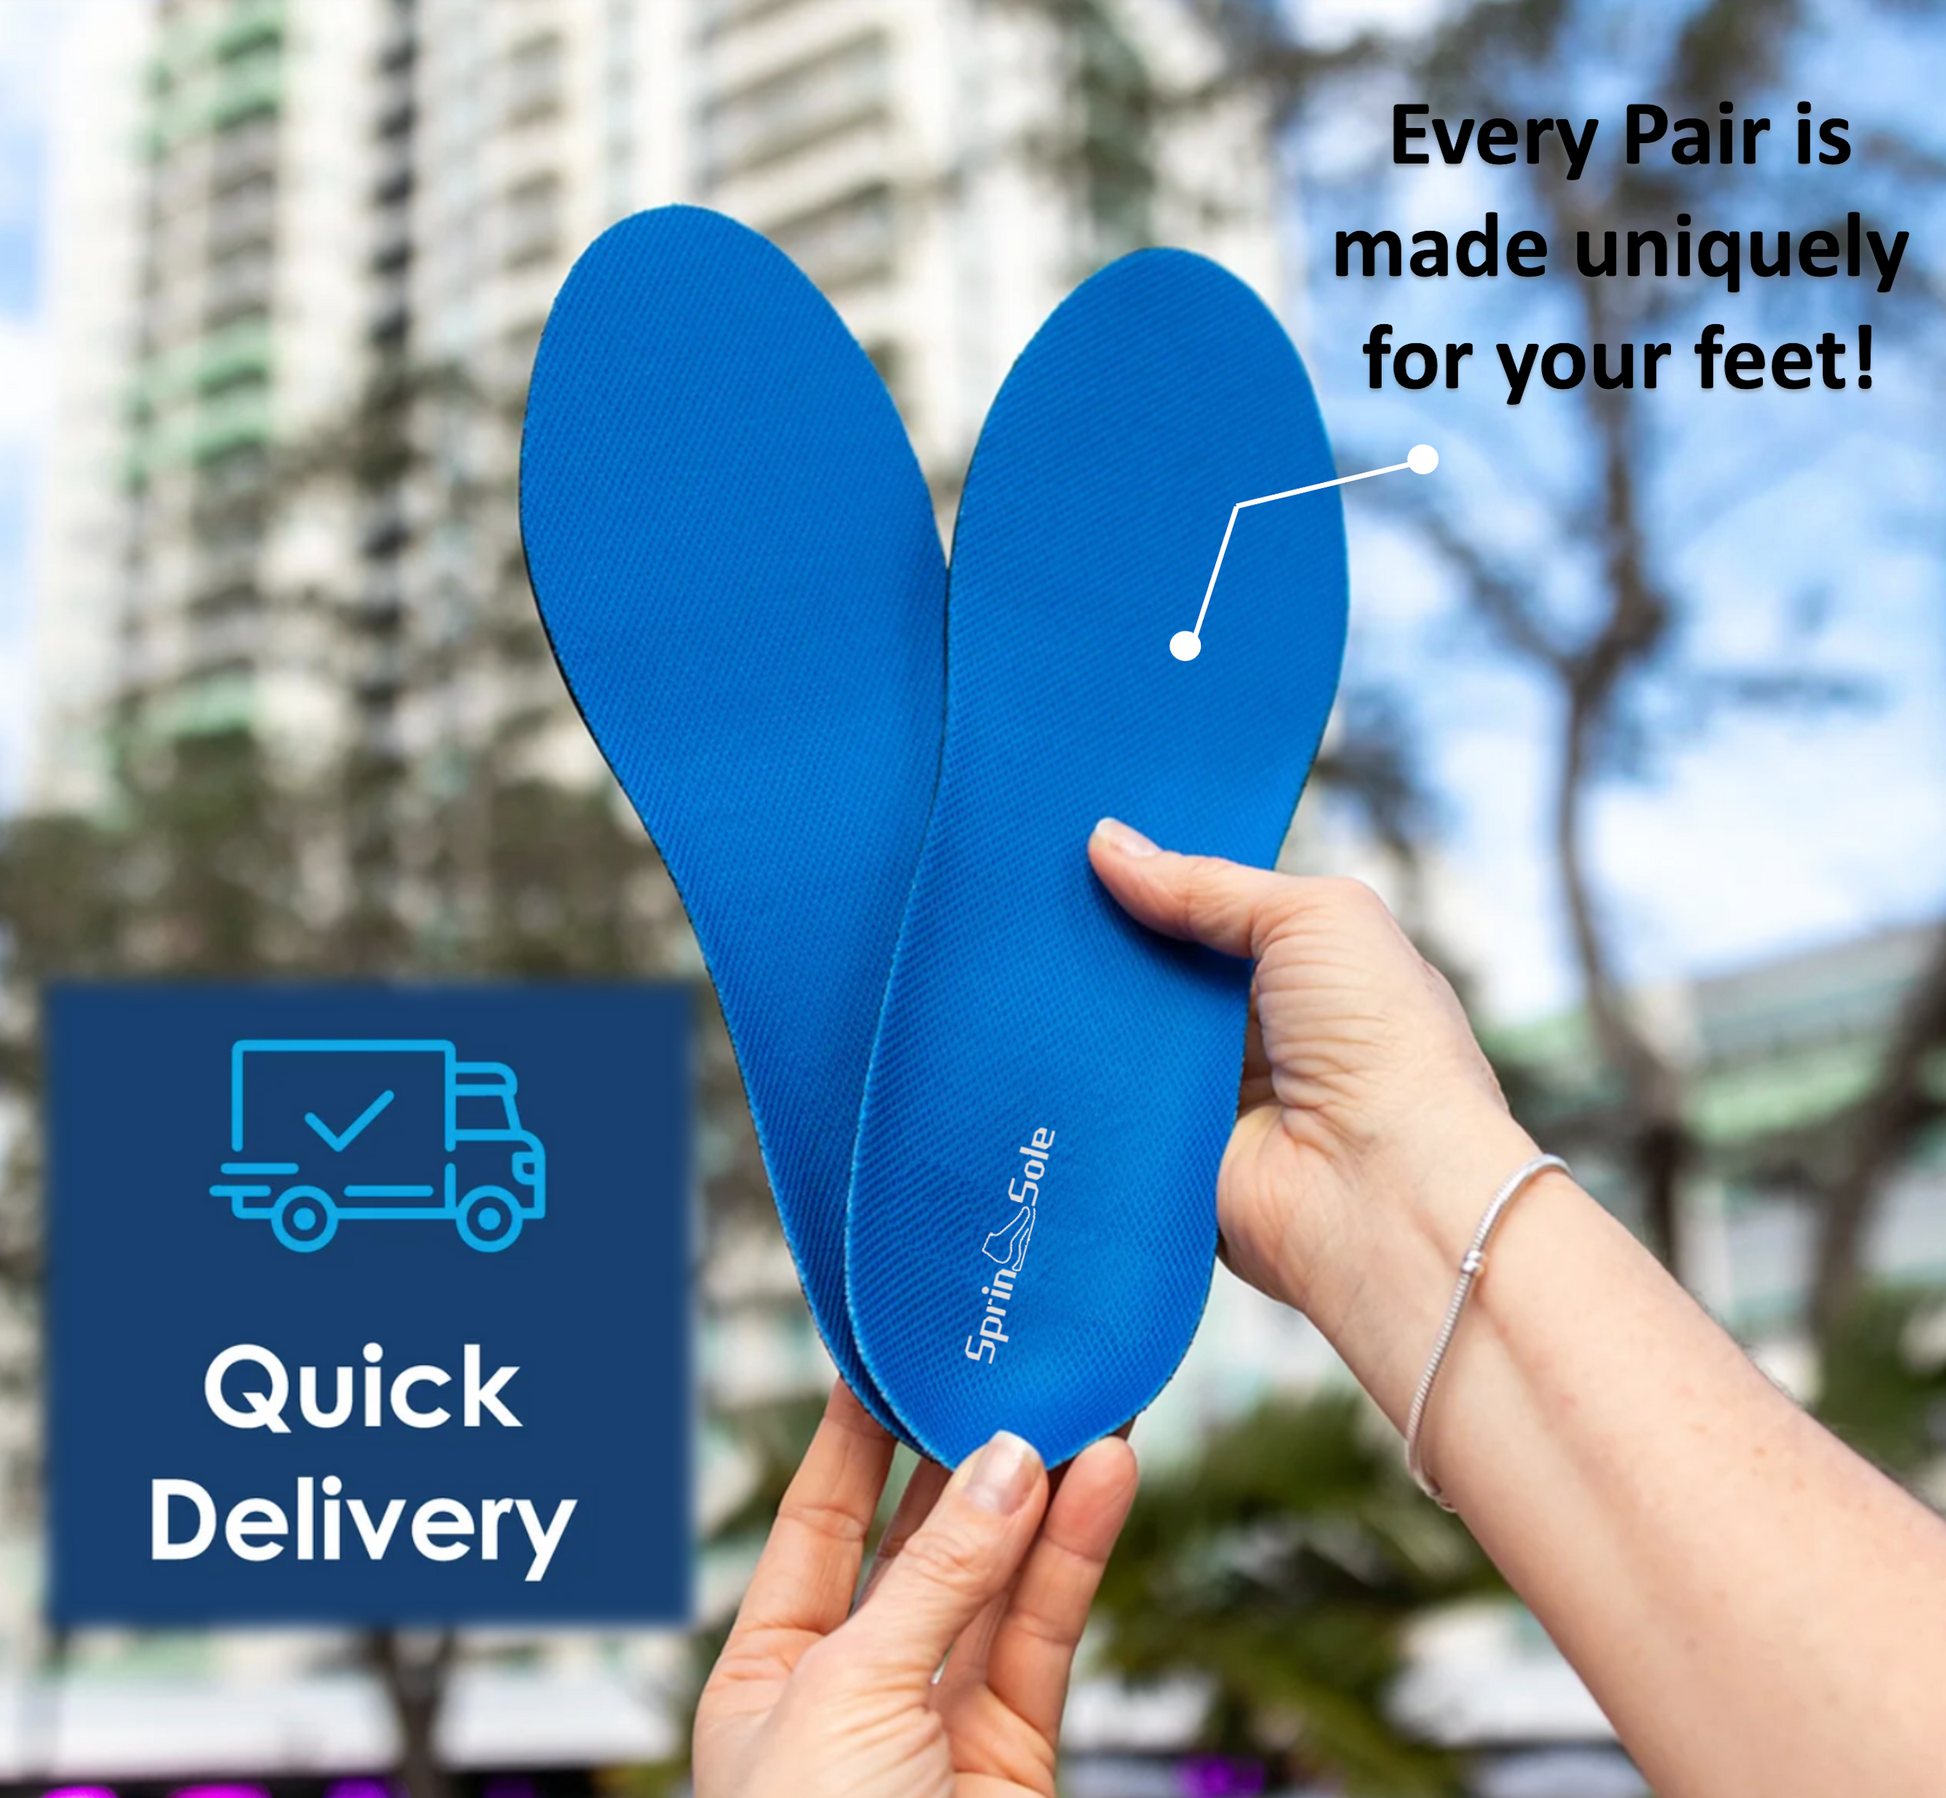 SprinSole custom orthotics quick delivery within one week